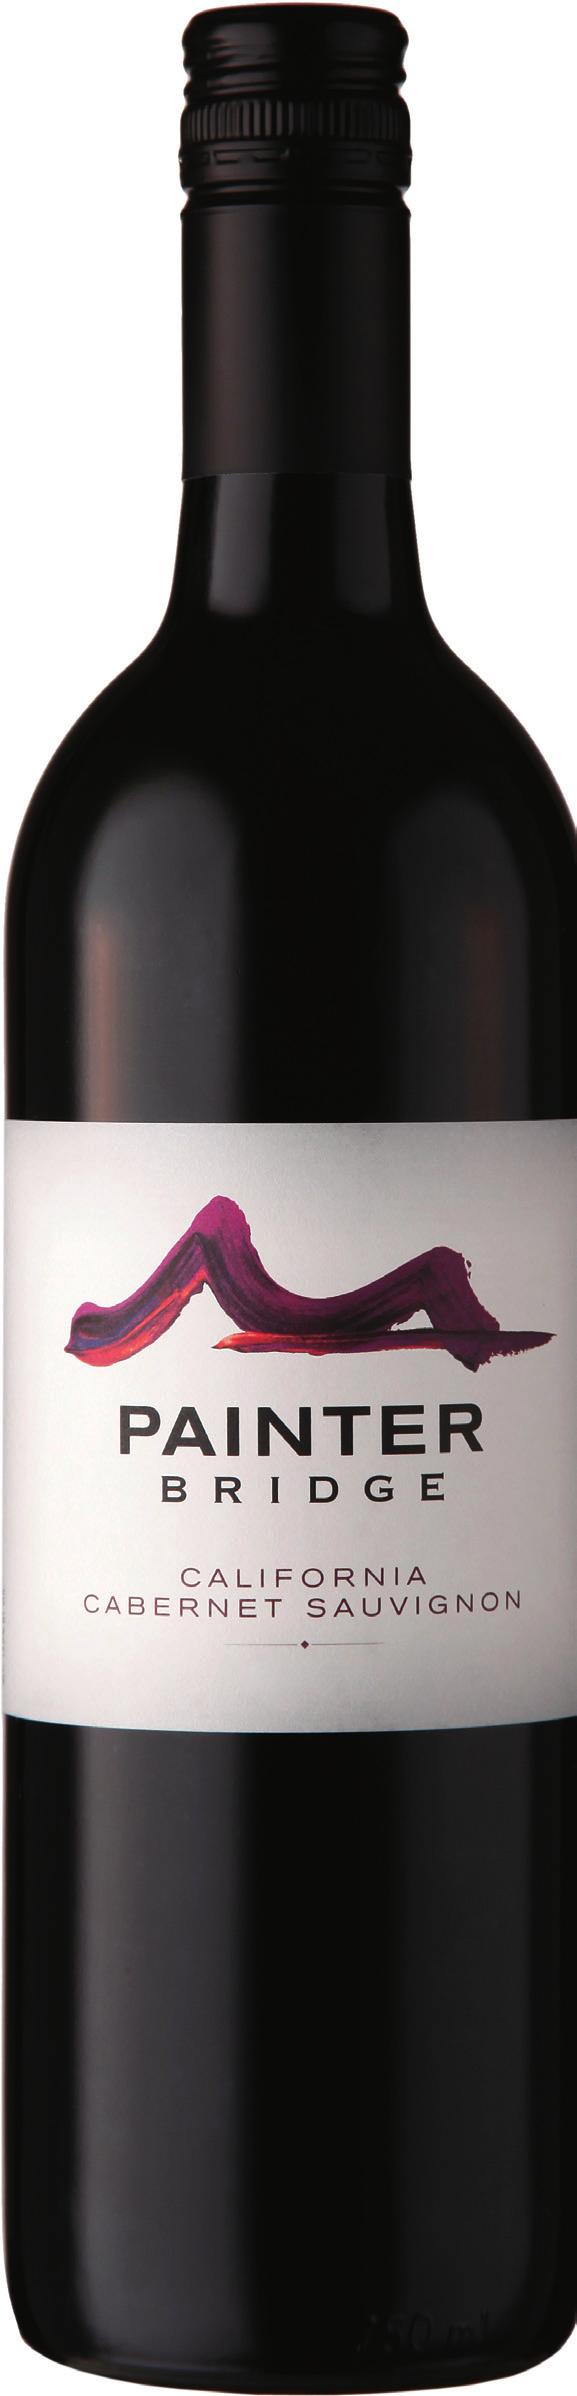 2012 PAINTER BRIDGE CABERNET SAUVIGNON CALIFORNIA PRODUCTION NOTES Painter Bridge Cabernet Sauvignon comes from fruit grown on the Central Coast and northern interior of California.